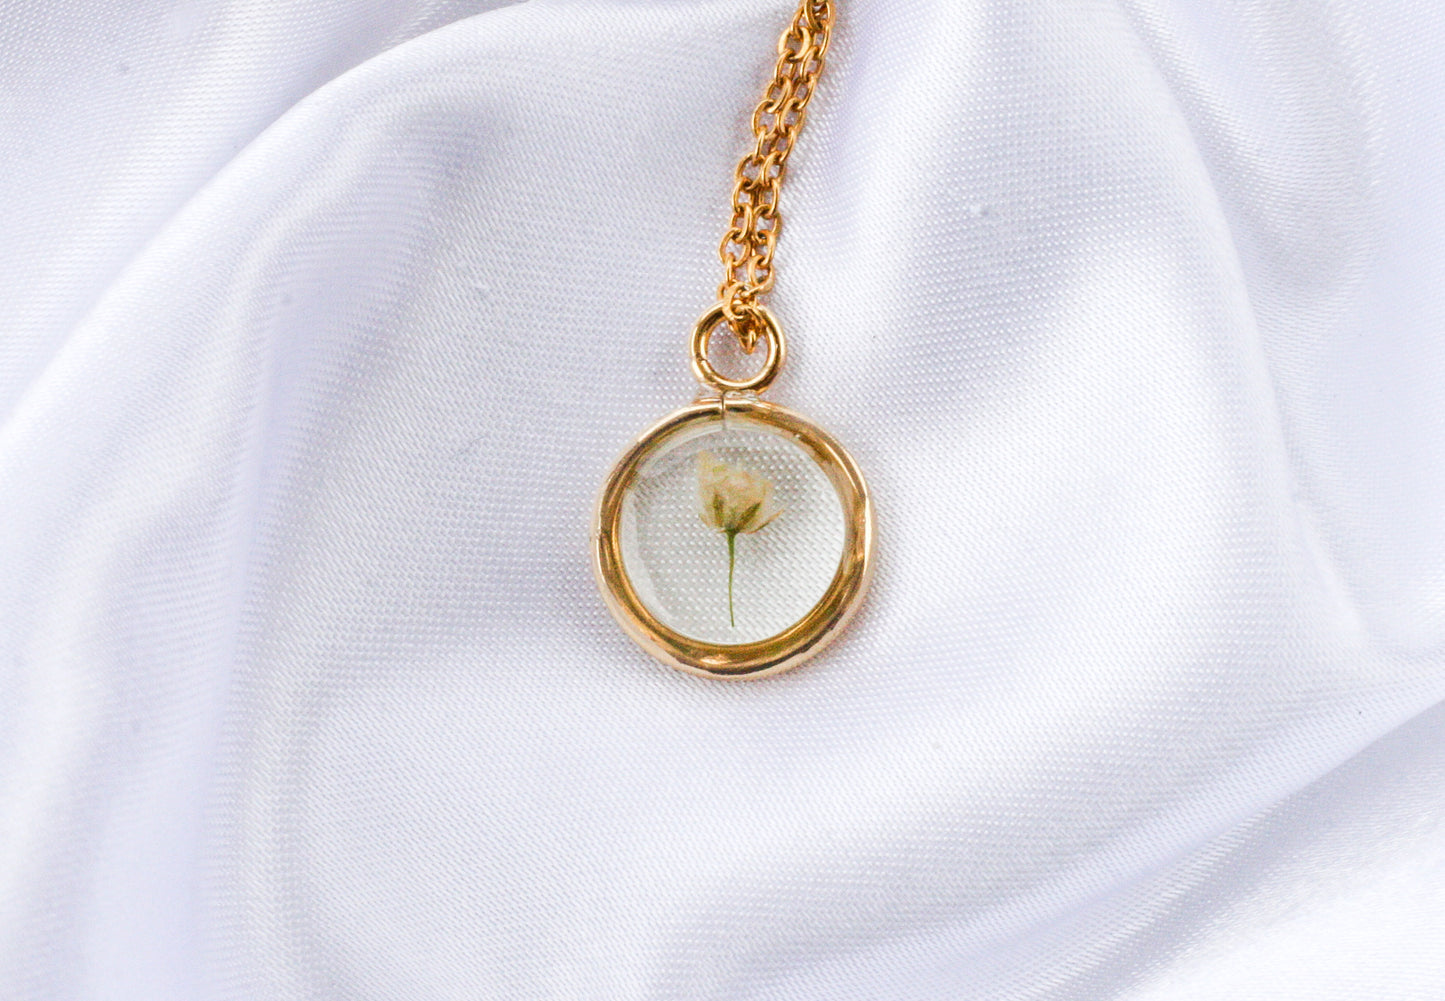 Yellow gold baby's breath necklace